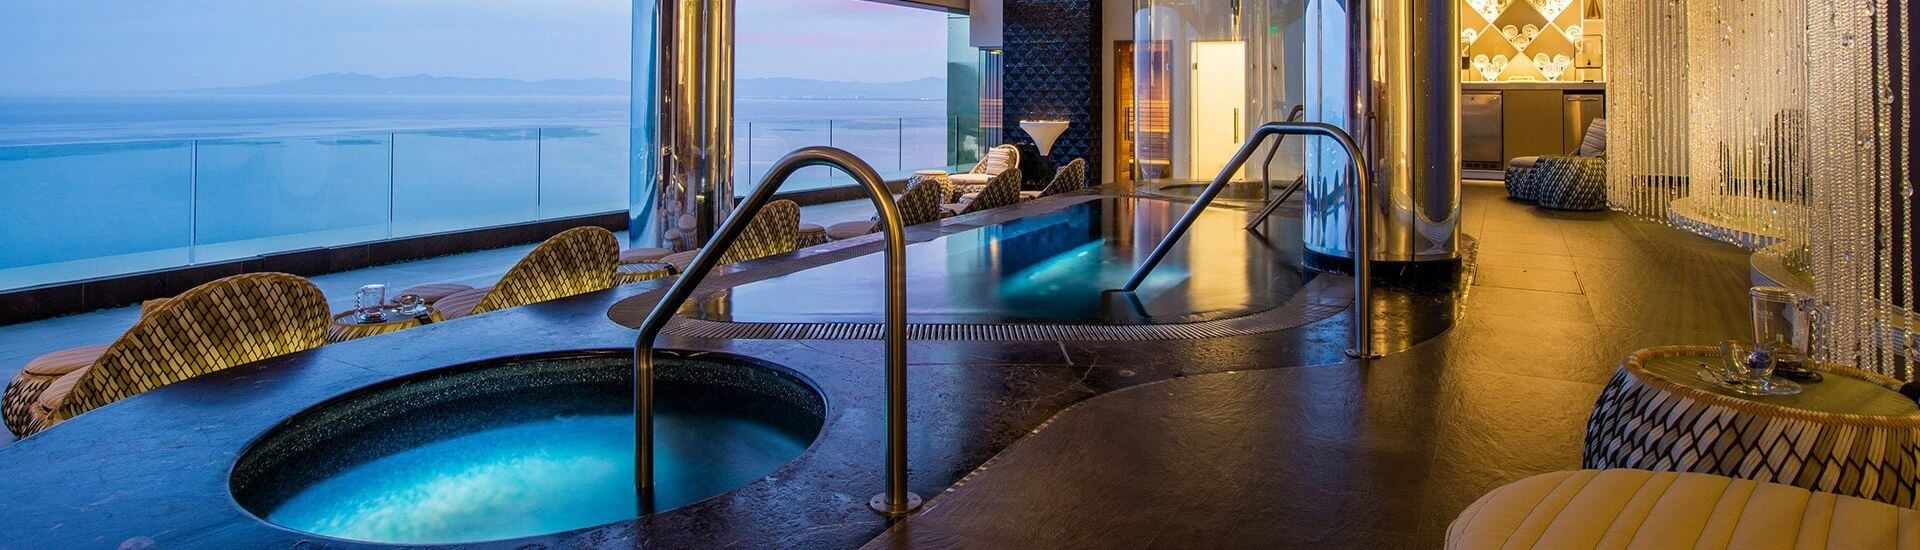 A spa with several pools, oversized chairs to sit and look out over the expansive ocean views.